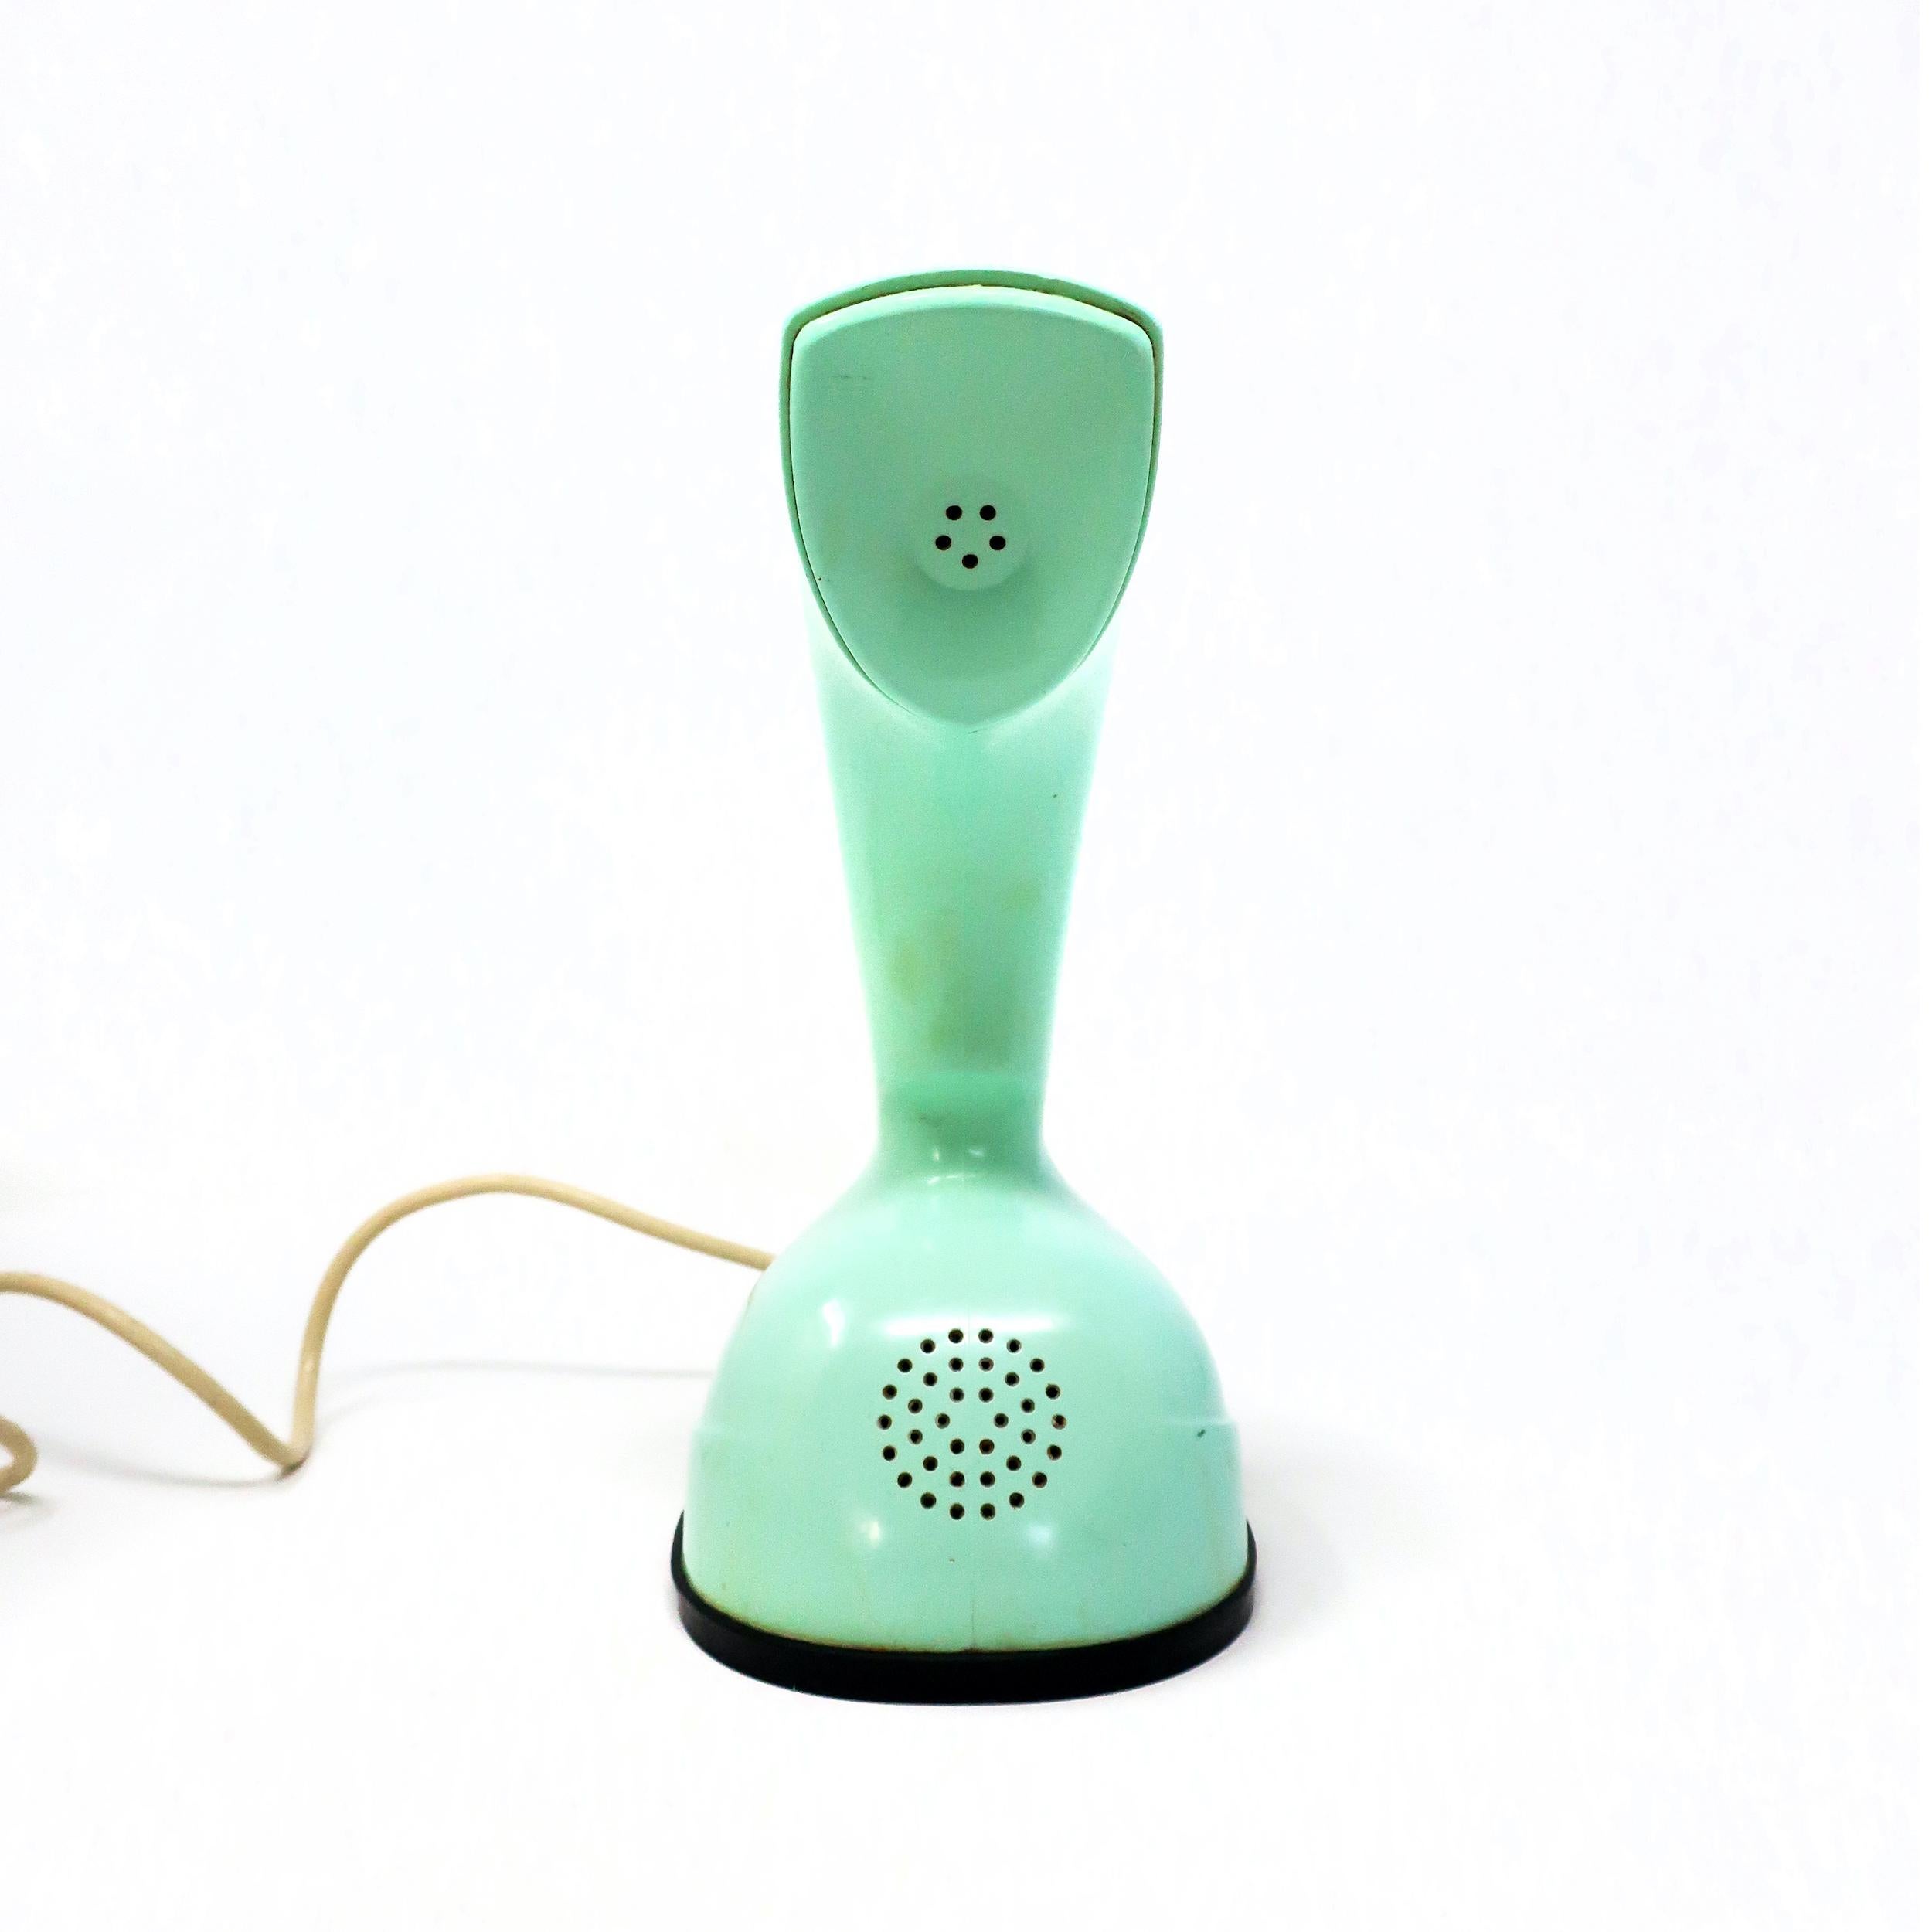 One of the icons of 20th century design, the Ericofon by Ericsson, known as the 